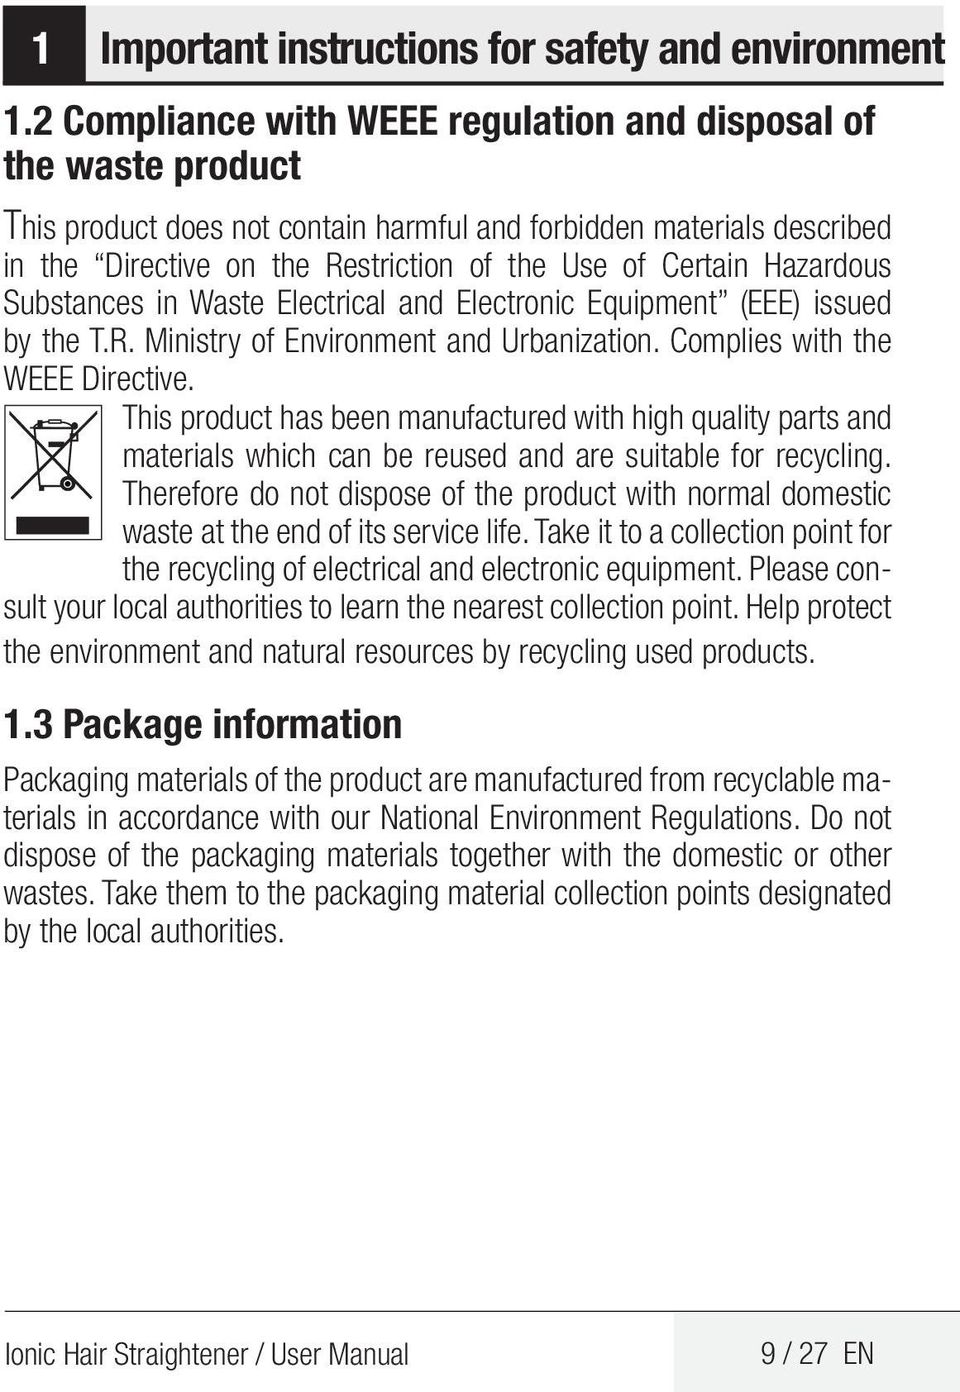 Hazardous Substances in Waste Electrical and Electronic Equipment (EEE) issued by the T.R. Ministry of Environment and Urbanization. Complies with the WEEE Directive.